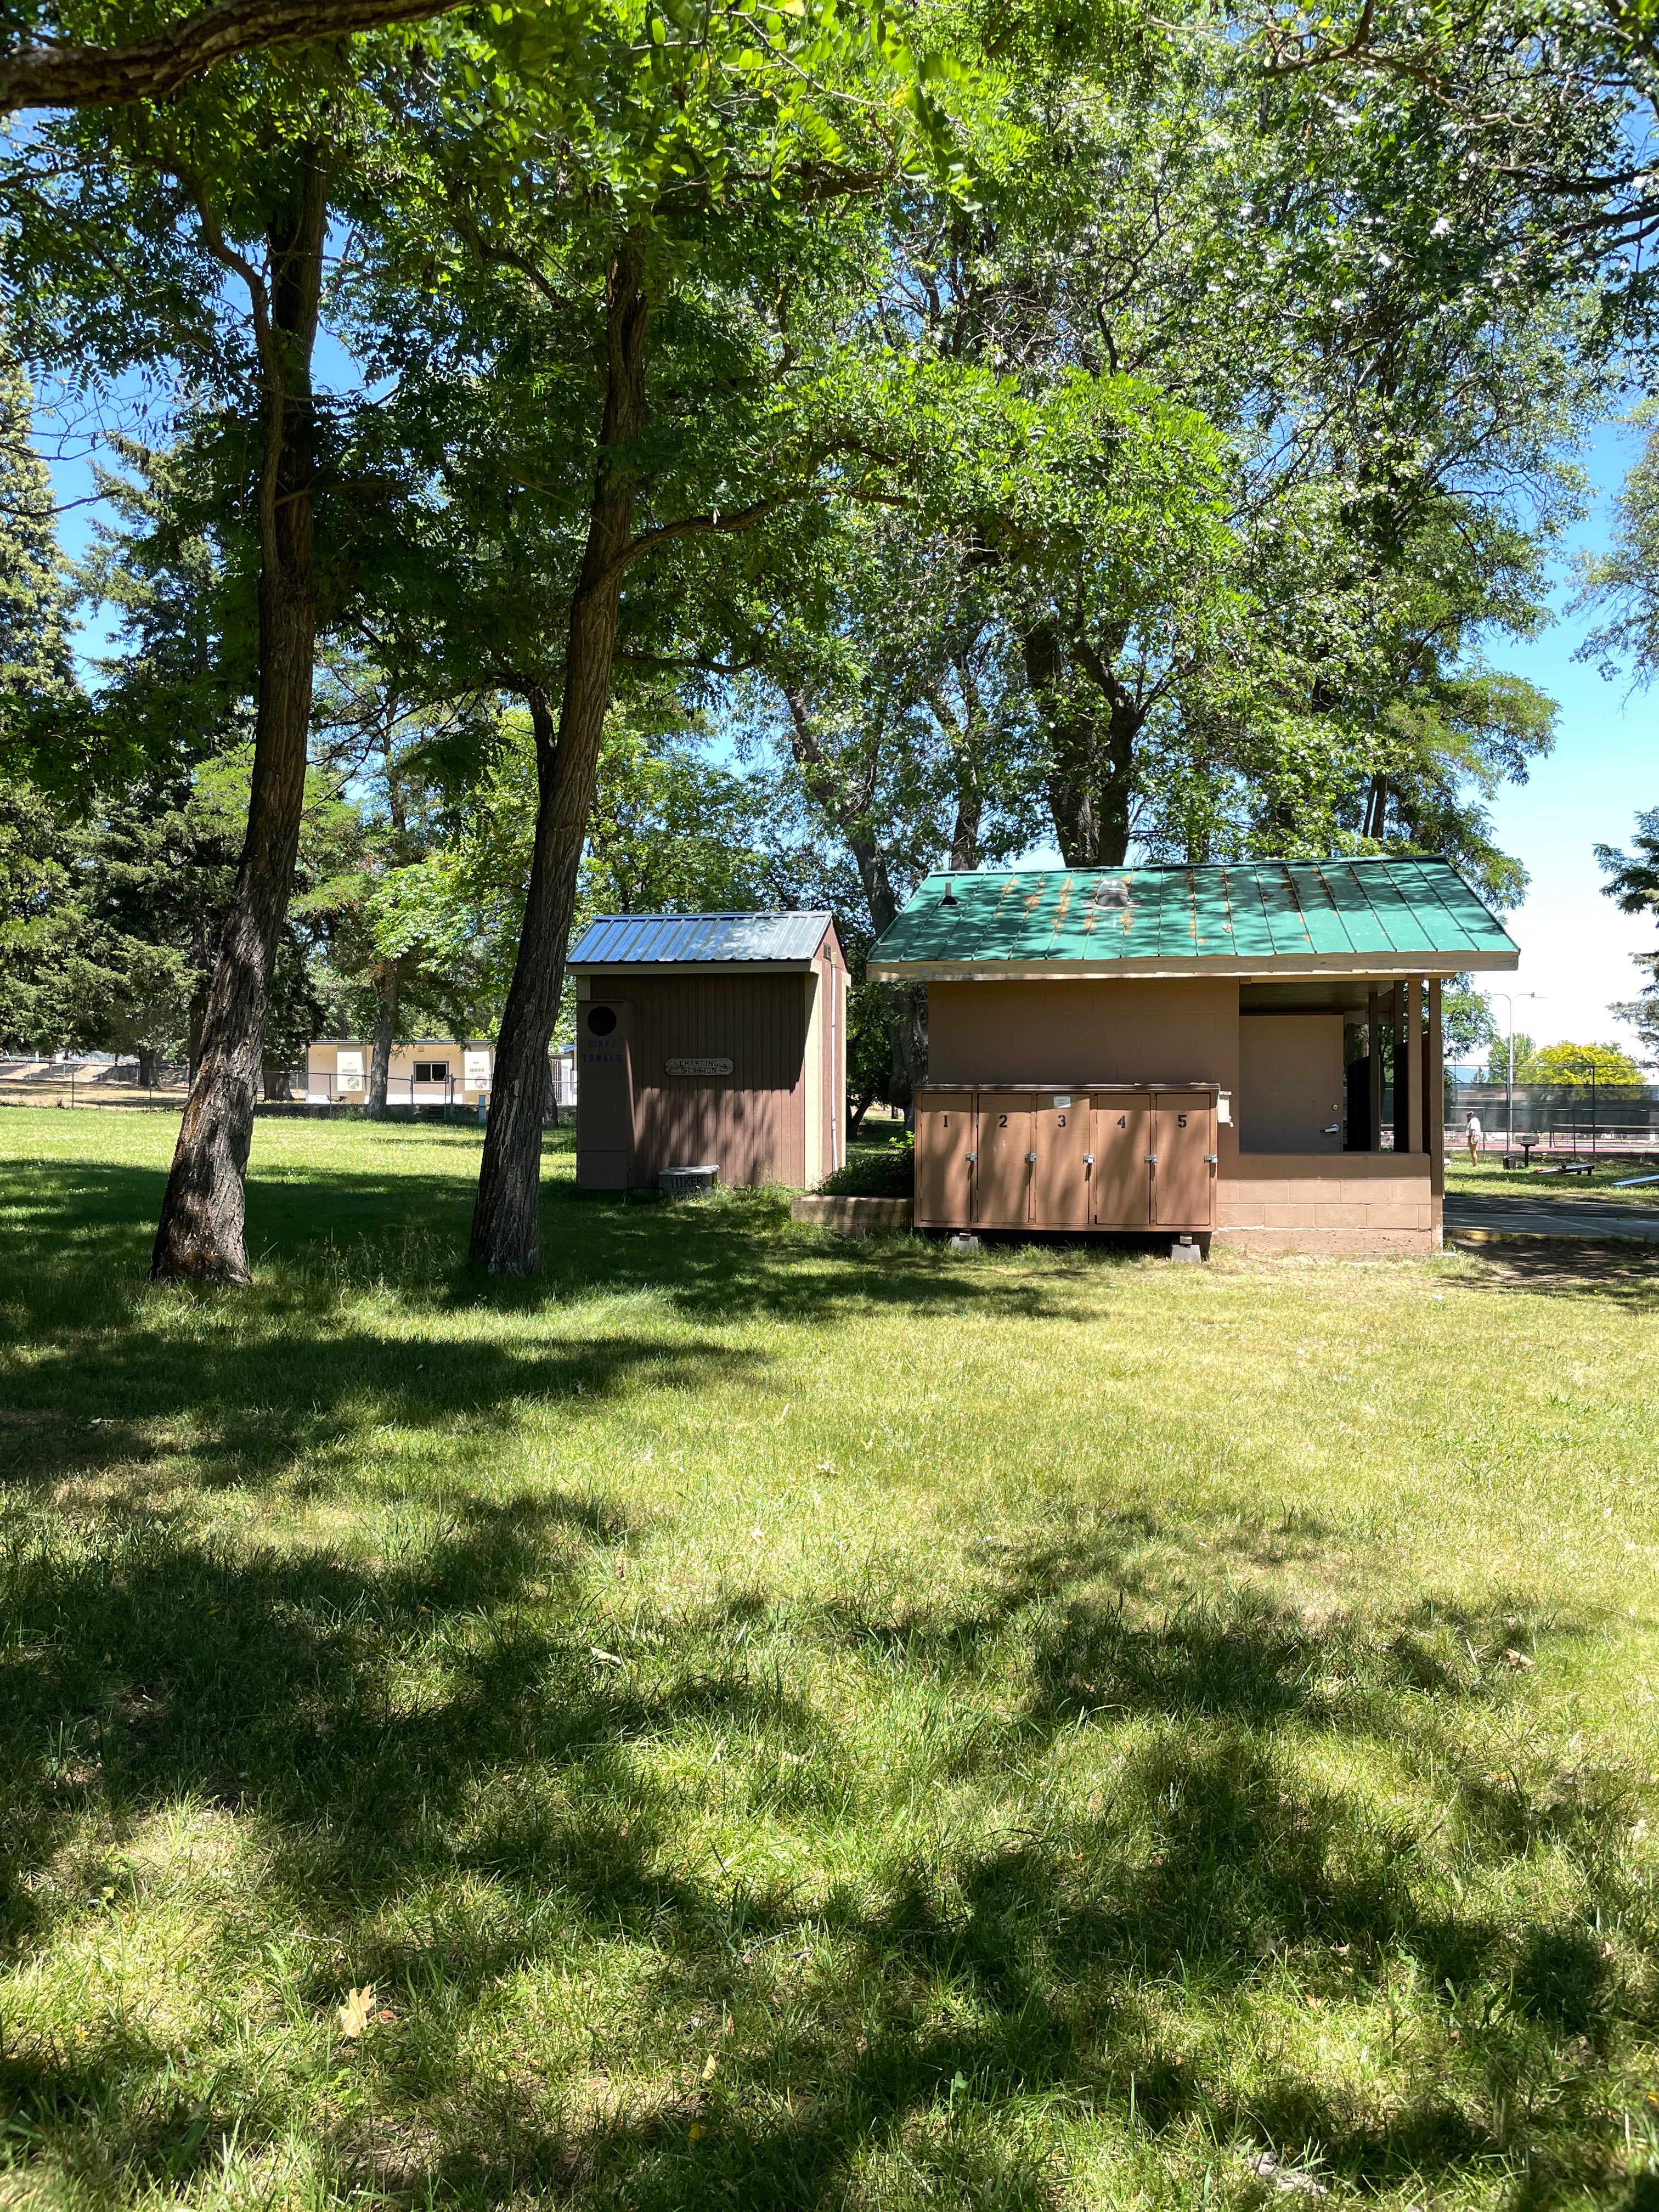 Camper submitted image from Etna City Park - 2